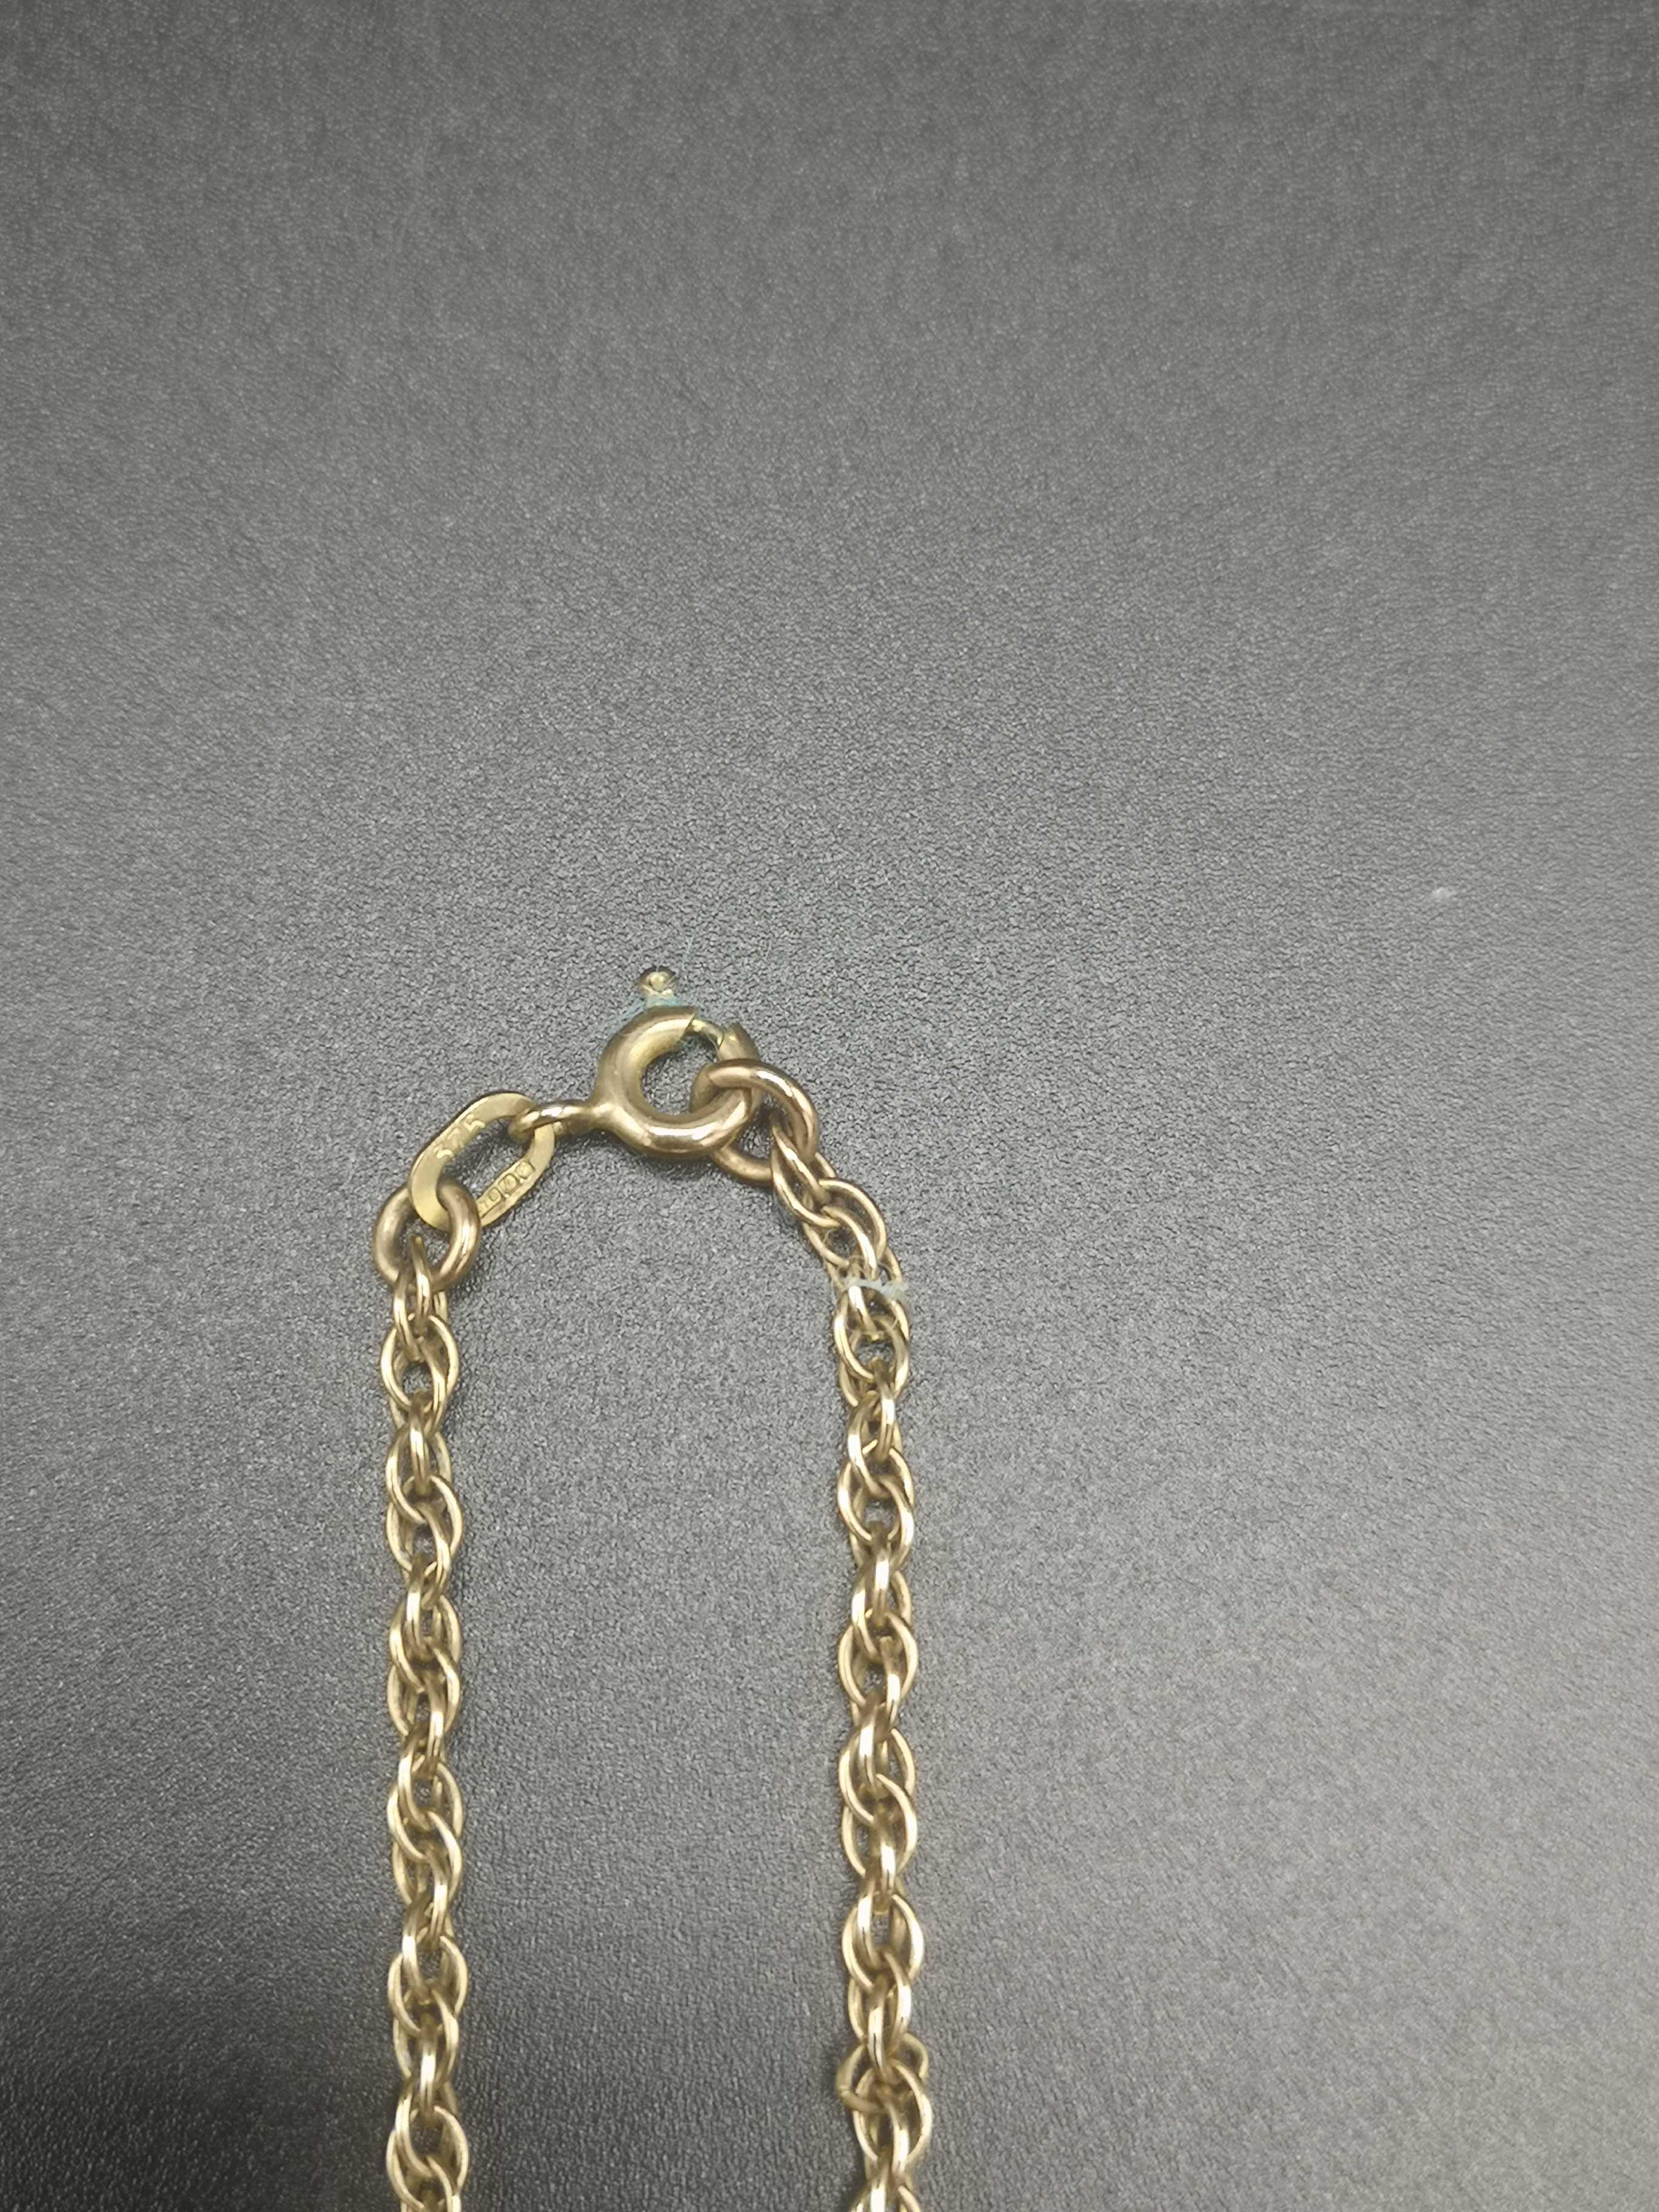 9ct gold necklace - Image 4 of 6